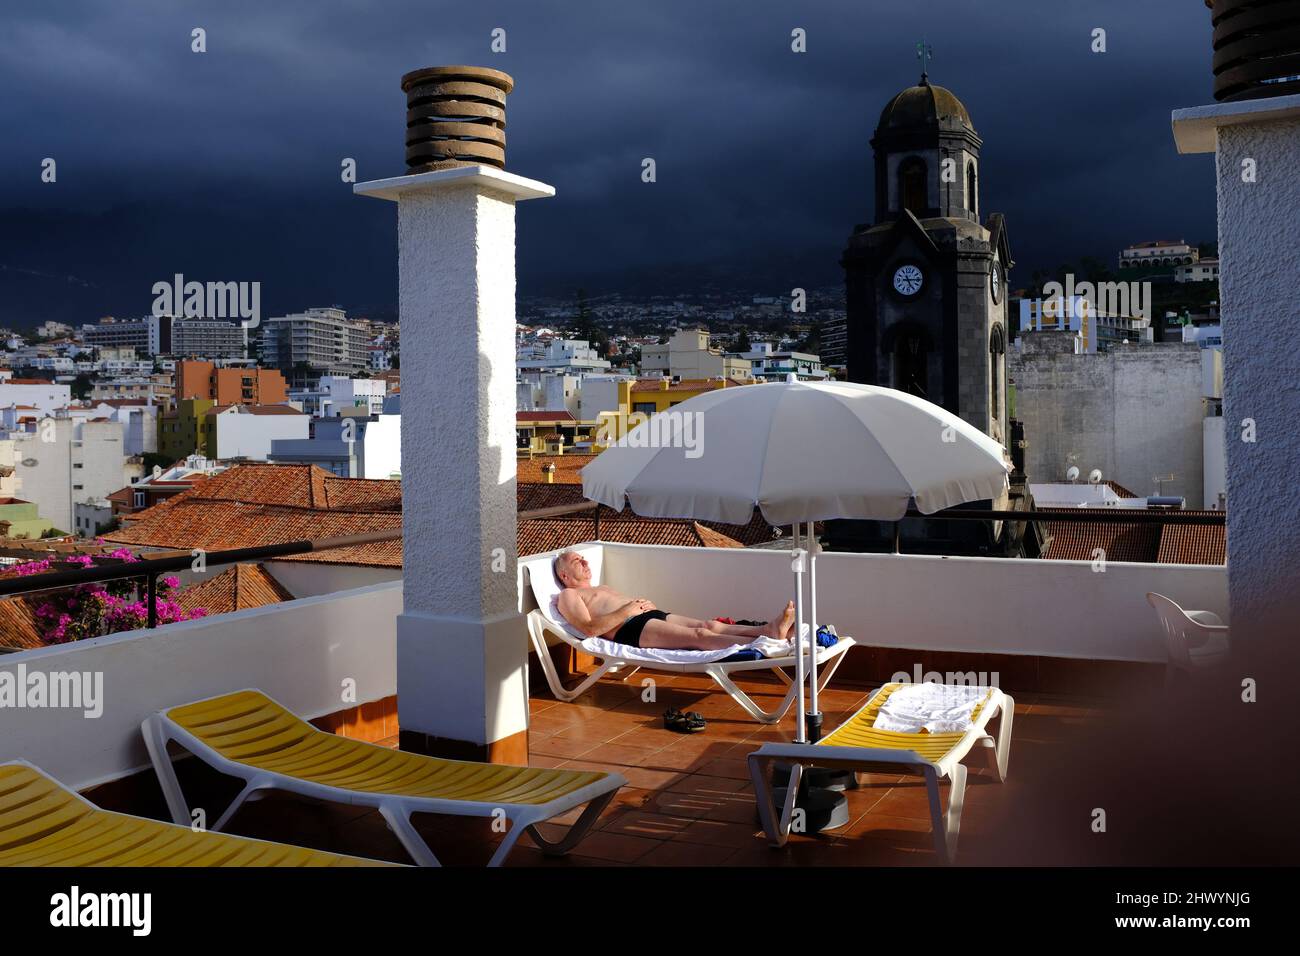 An older male sunbathing on a sun bed with the town of Puerto de la Cruz, Tenerife, in the background, Stock Photo